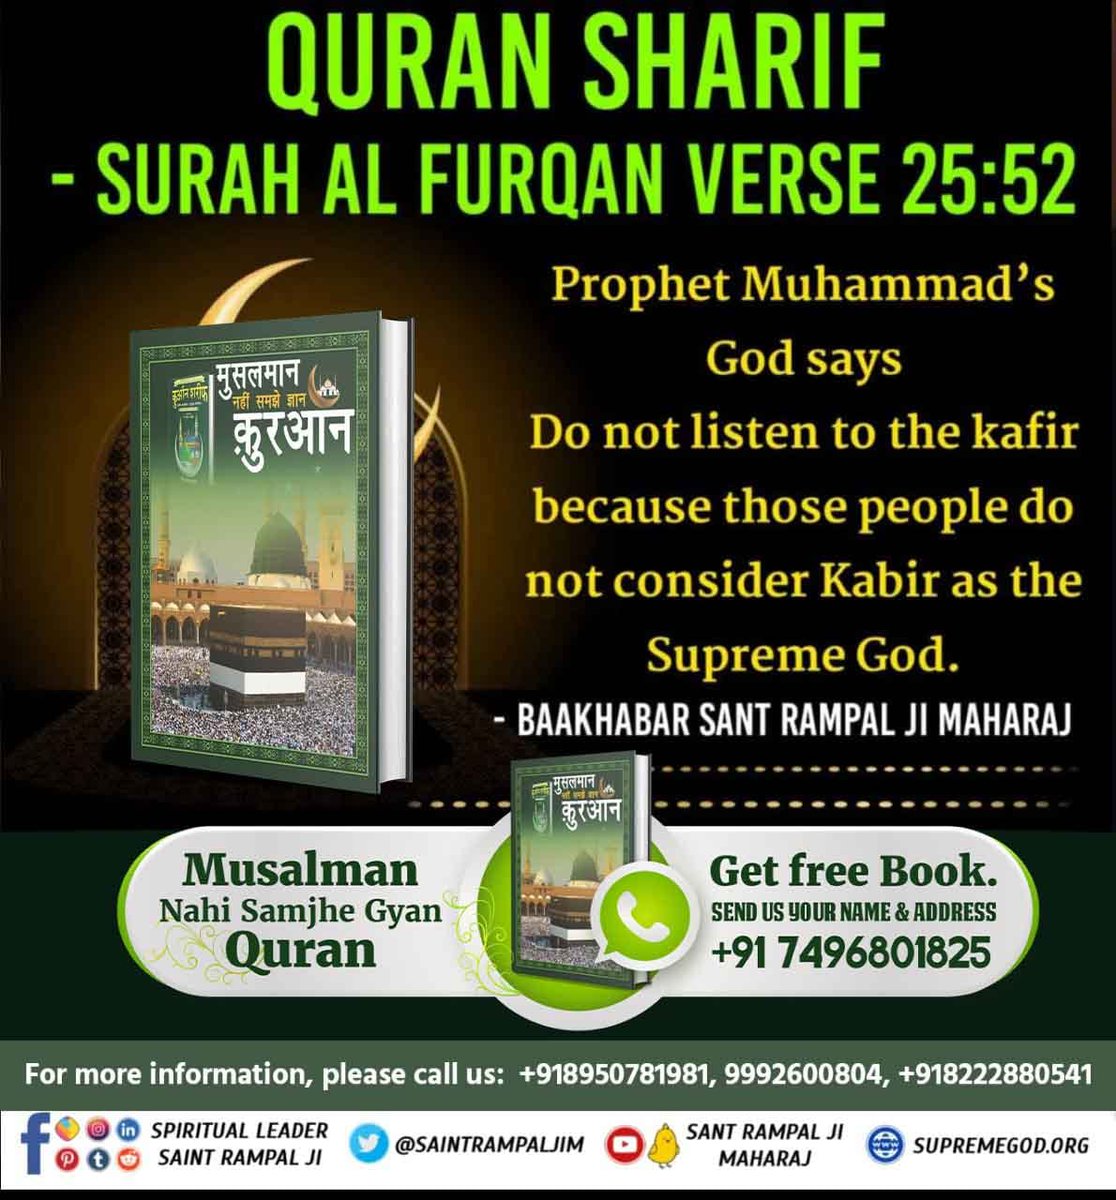 Allah/God is Kabir
Quran, Surah Al Furqan 25:52
Remain firm on the basis of the knowledge of Quran given by me that, Kabir only is the Supreme God.
Almighty God Kabir is the creator and the suatainer of all. All holy books have proved it.

#अल्लाह_का_इल्म_बाखबर_से_पूछो